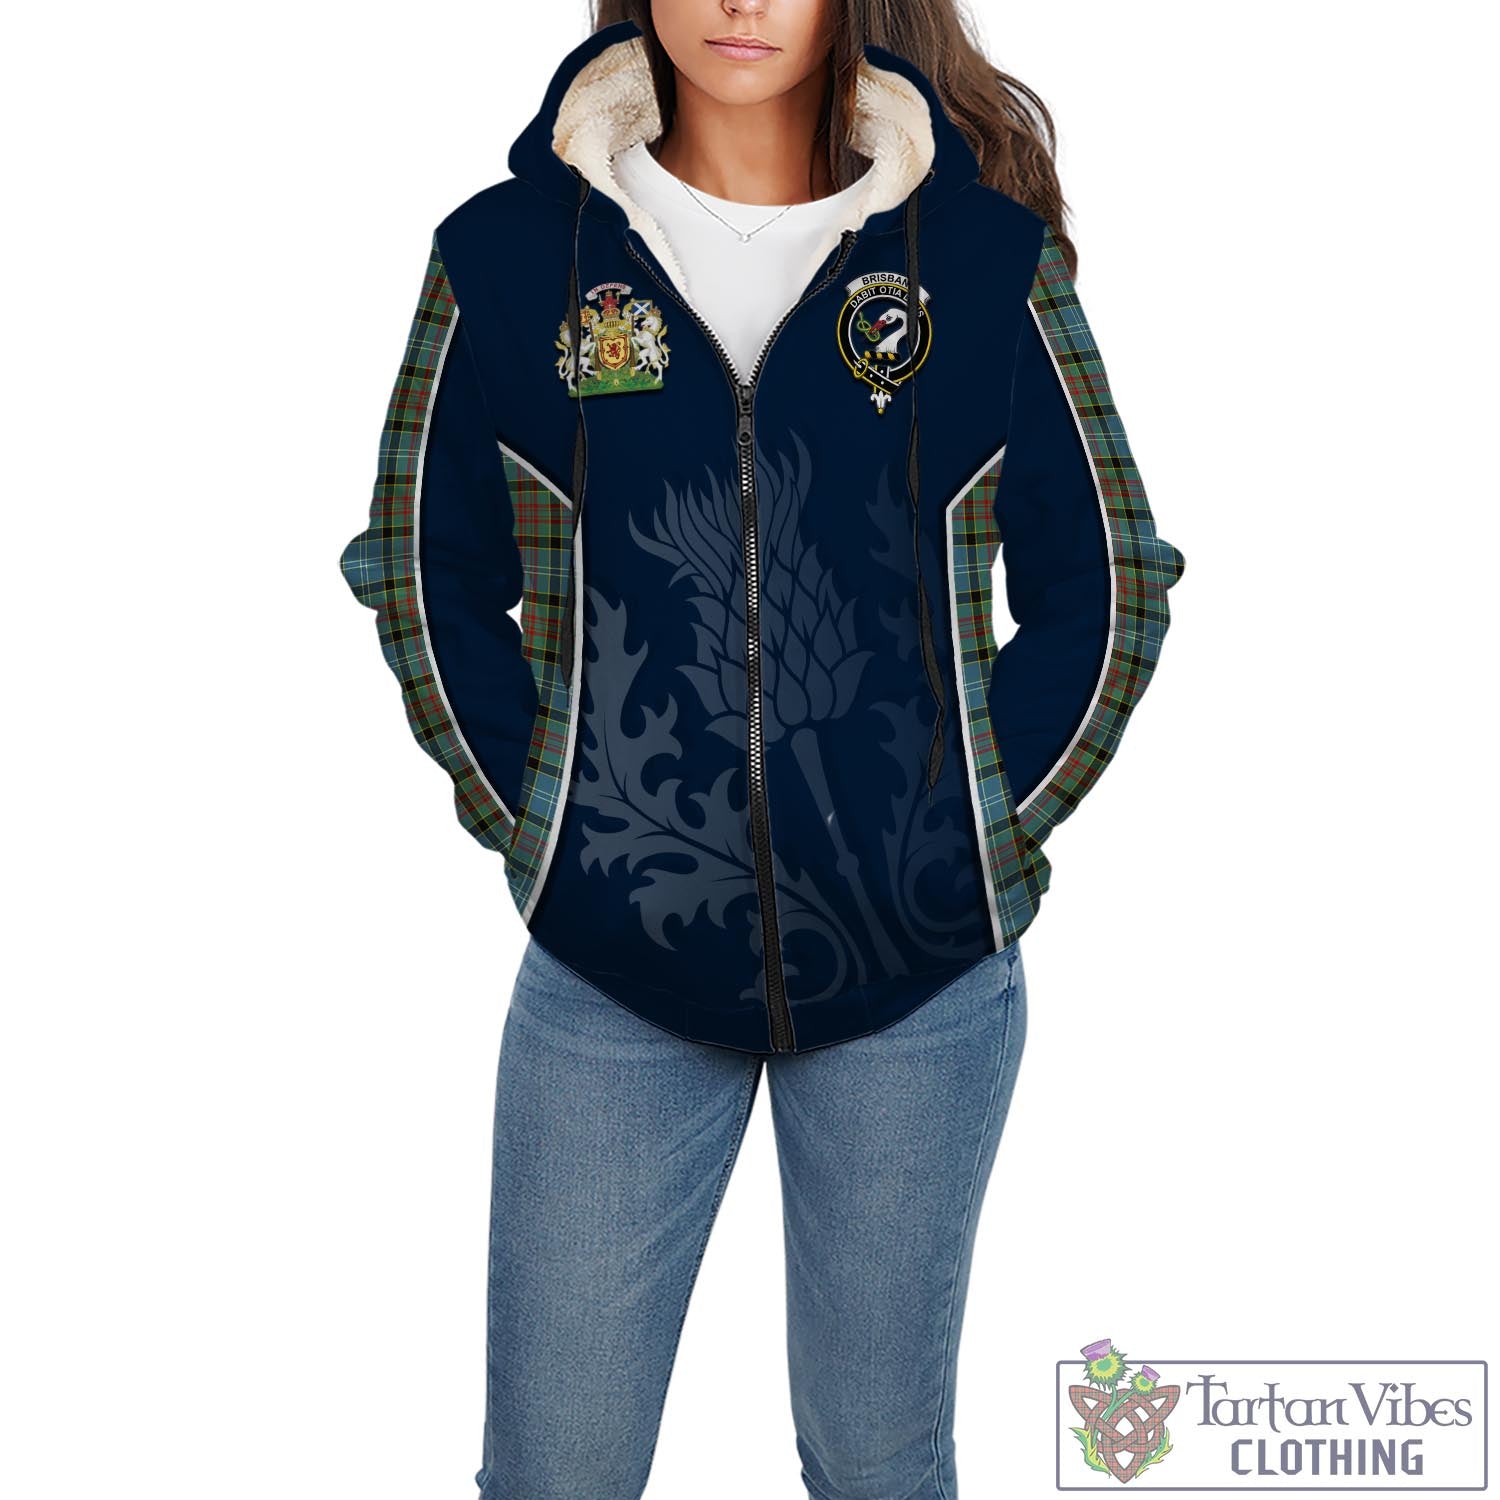 Tartan Vibes Clothing Brisbane modern Tartan Sherpa Hoodie with Family Crest and Scottish Thistle Vibes Sport Style